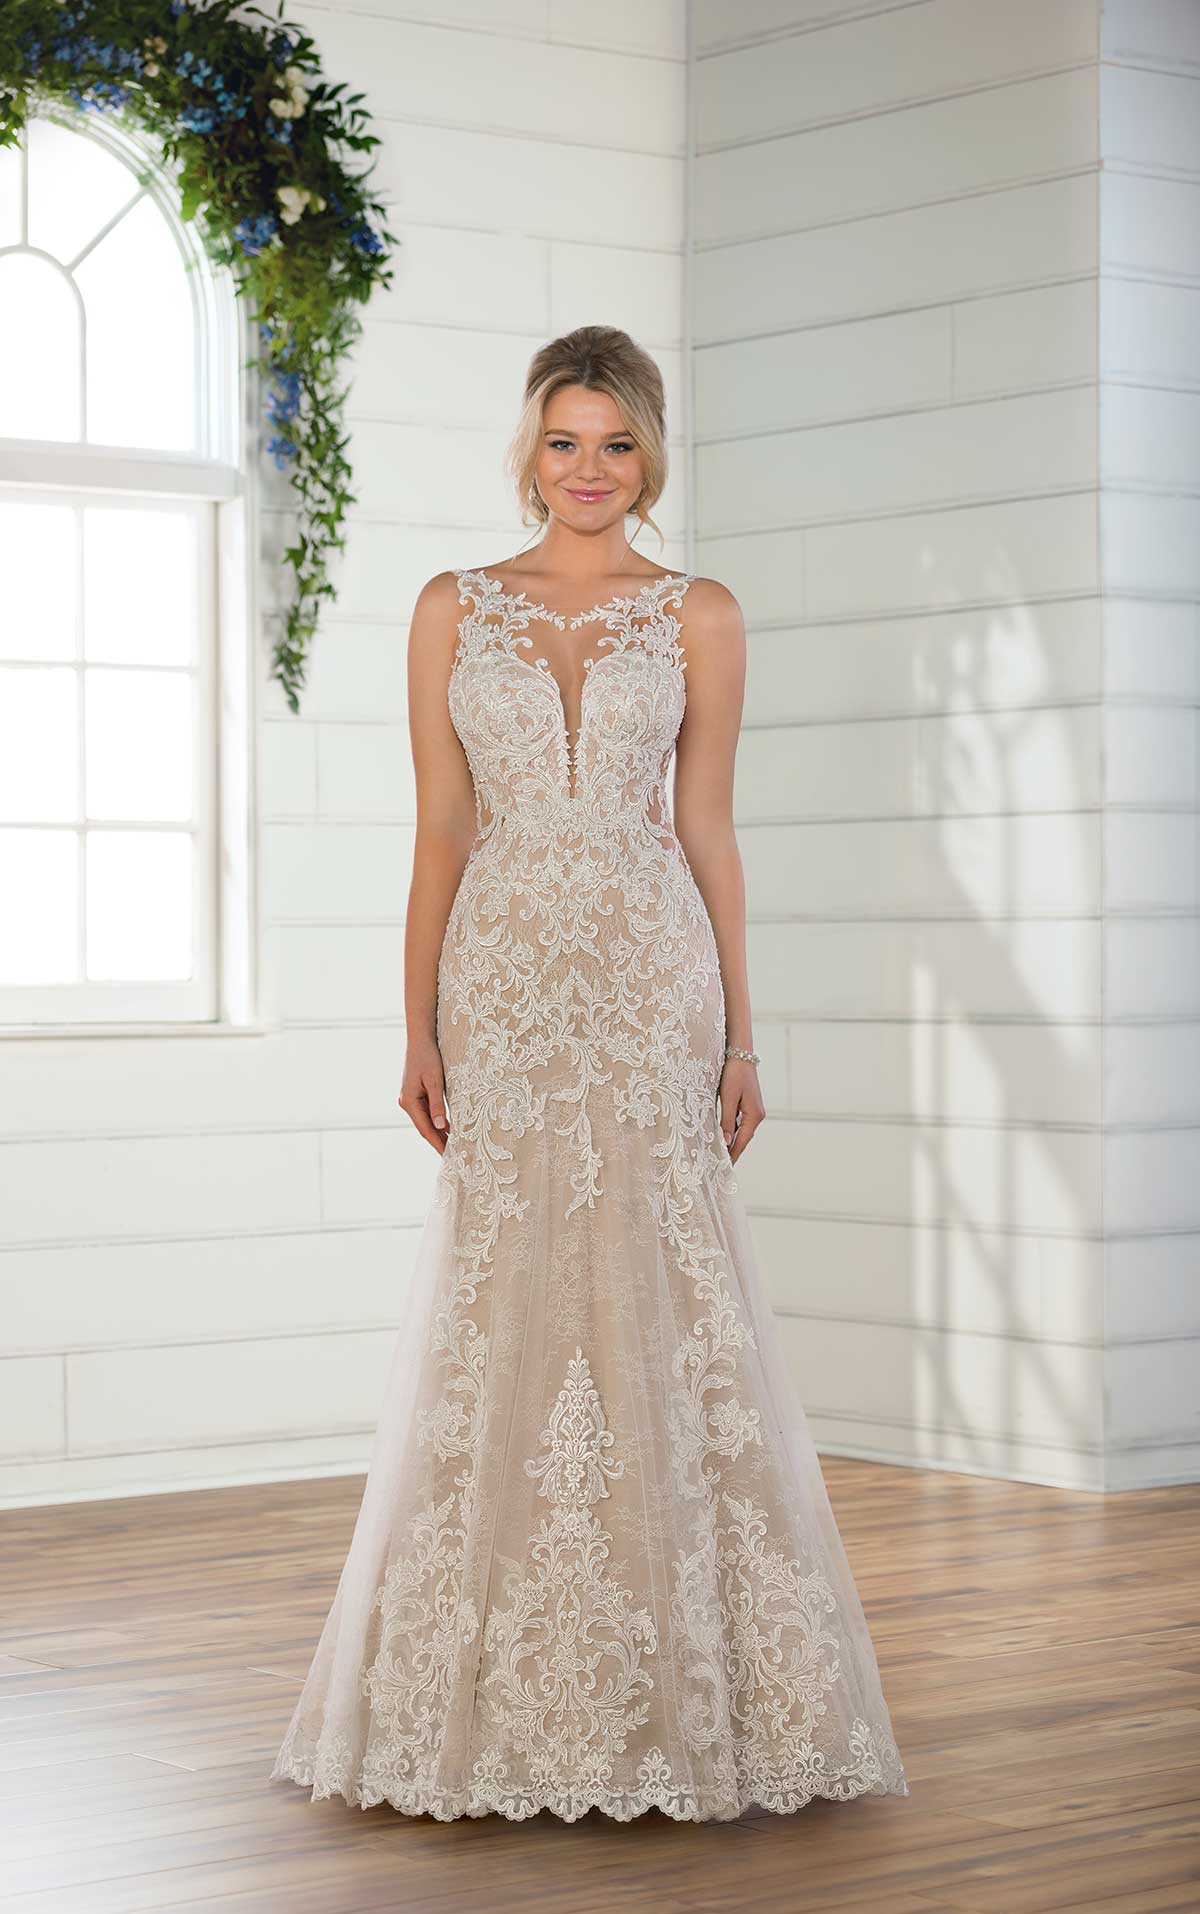 Amazing Wedding Lace Dress of all time Check it out now 